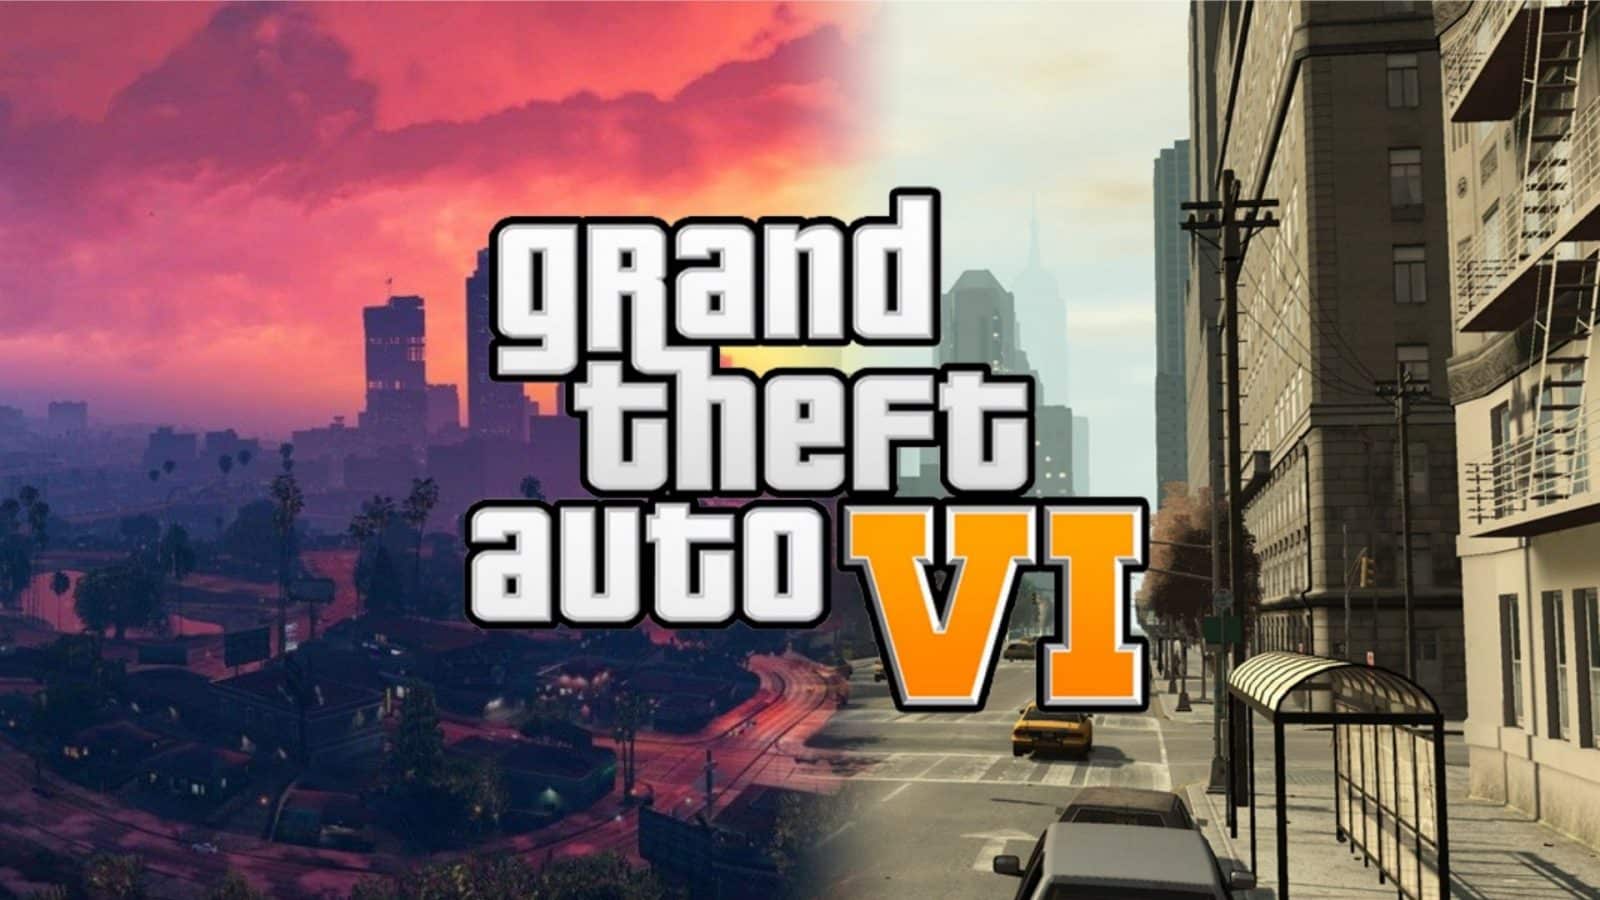 Sleuth believes he's found Grand Theft Auto VI release date